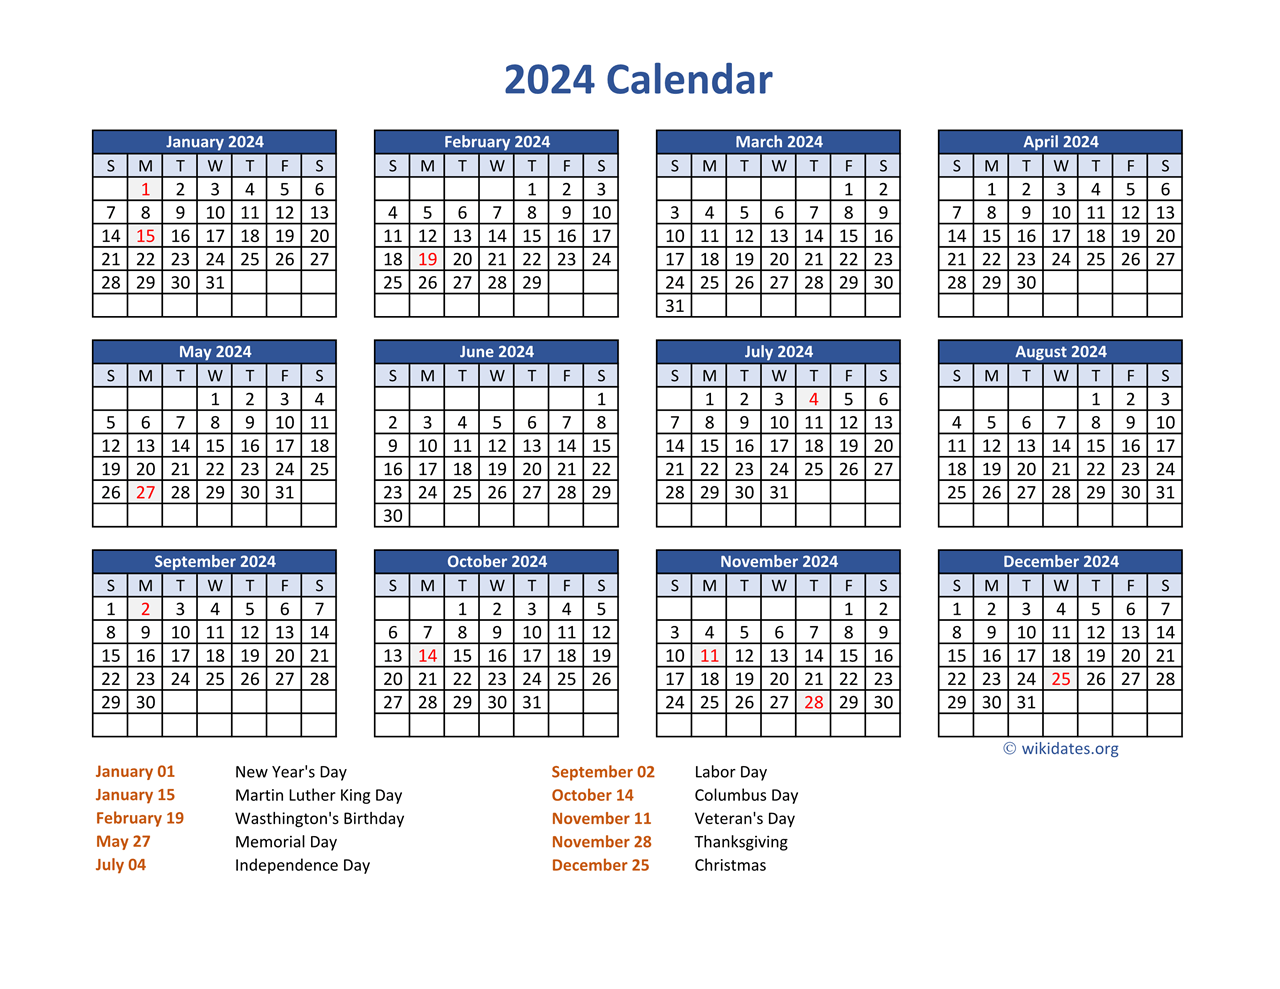 Pdf Calendar 2024 With Federal Holidays | Wikidates for Free Printable Yearly Calendar 2024 With Holidays